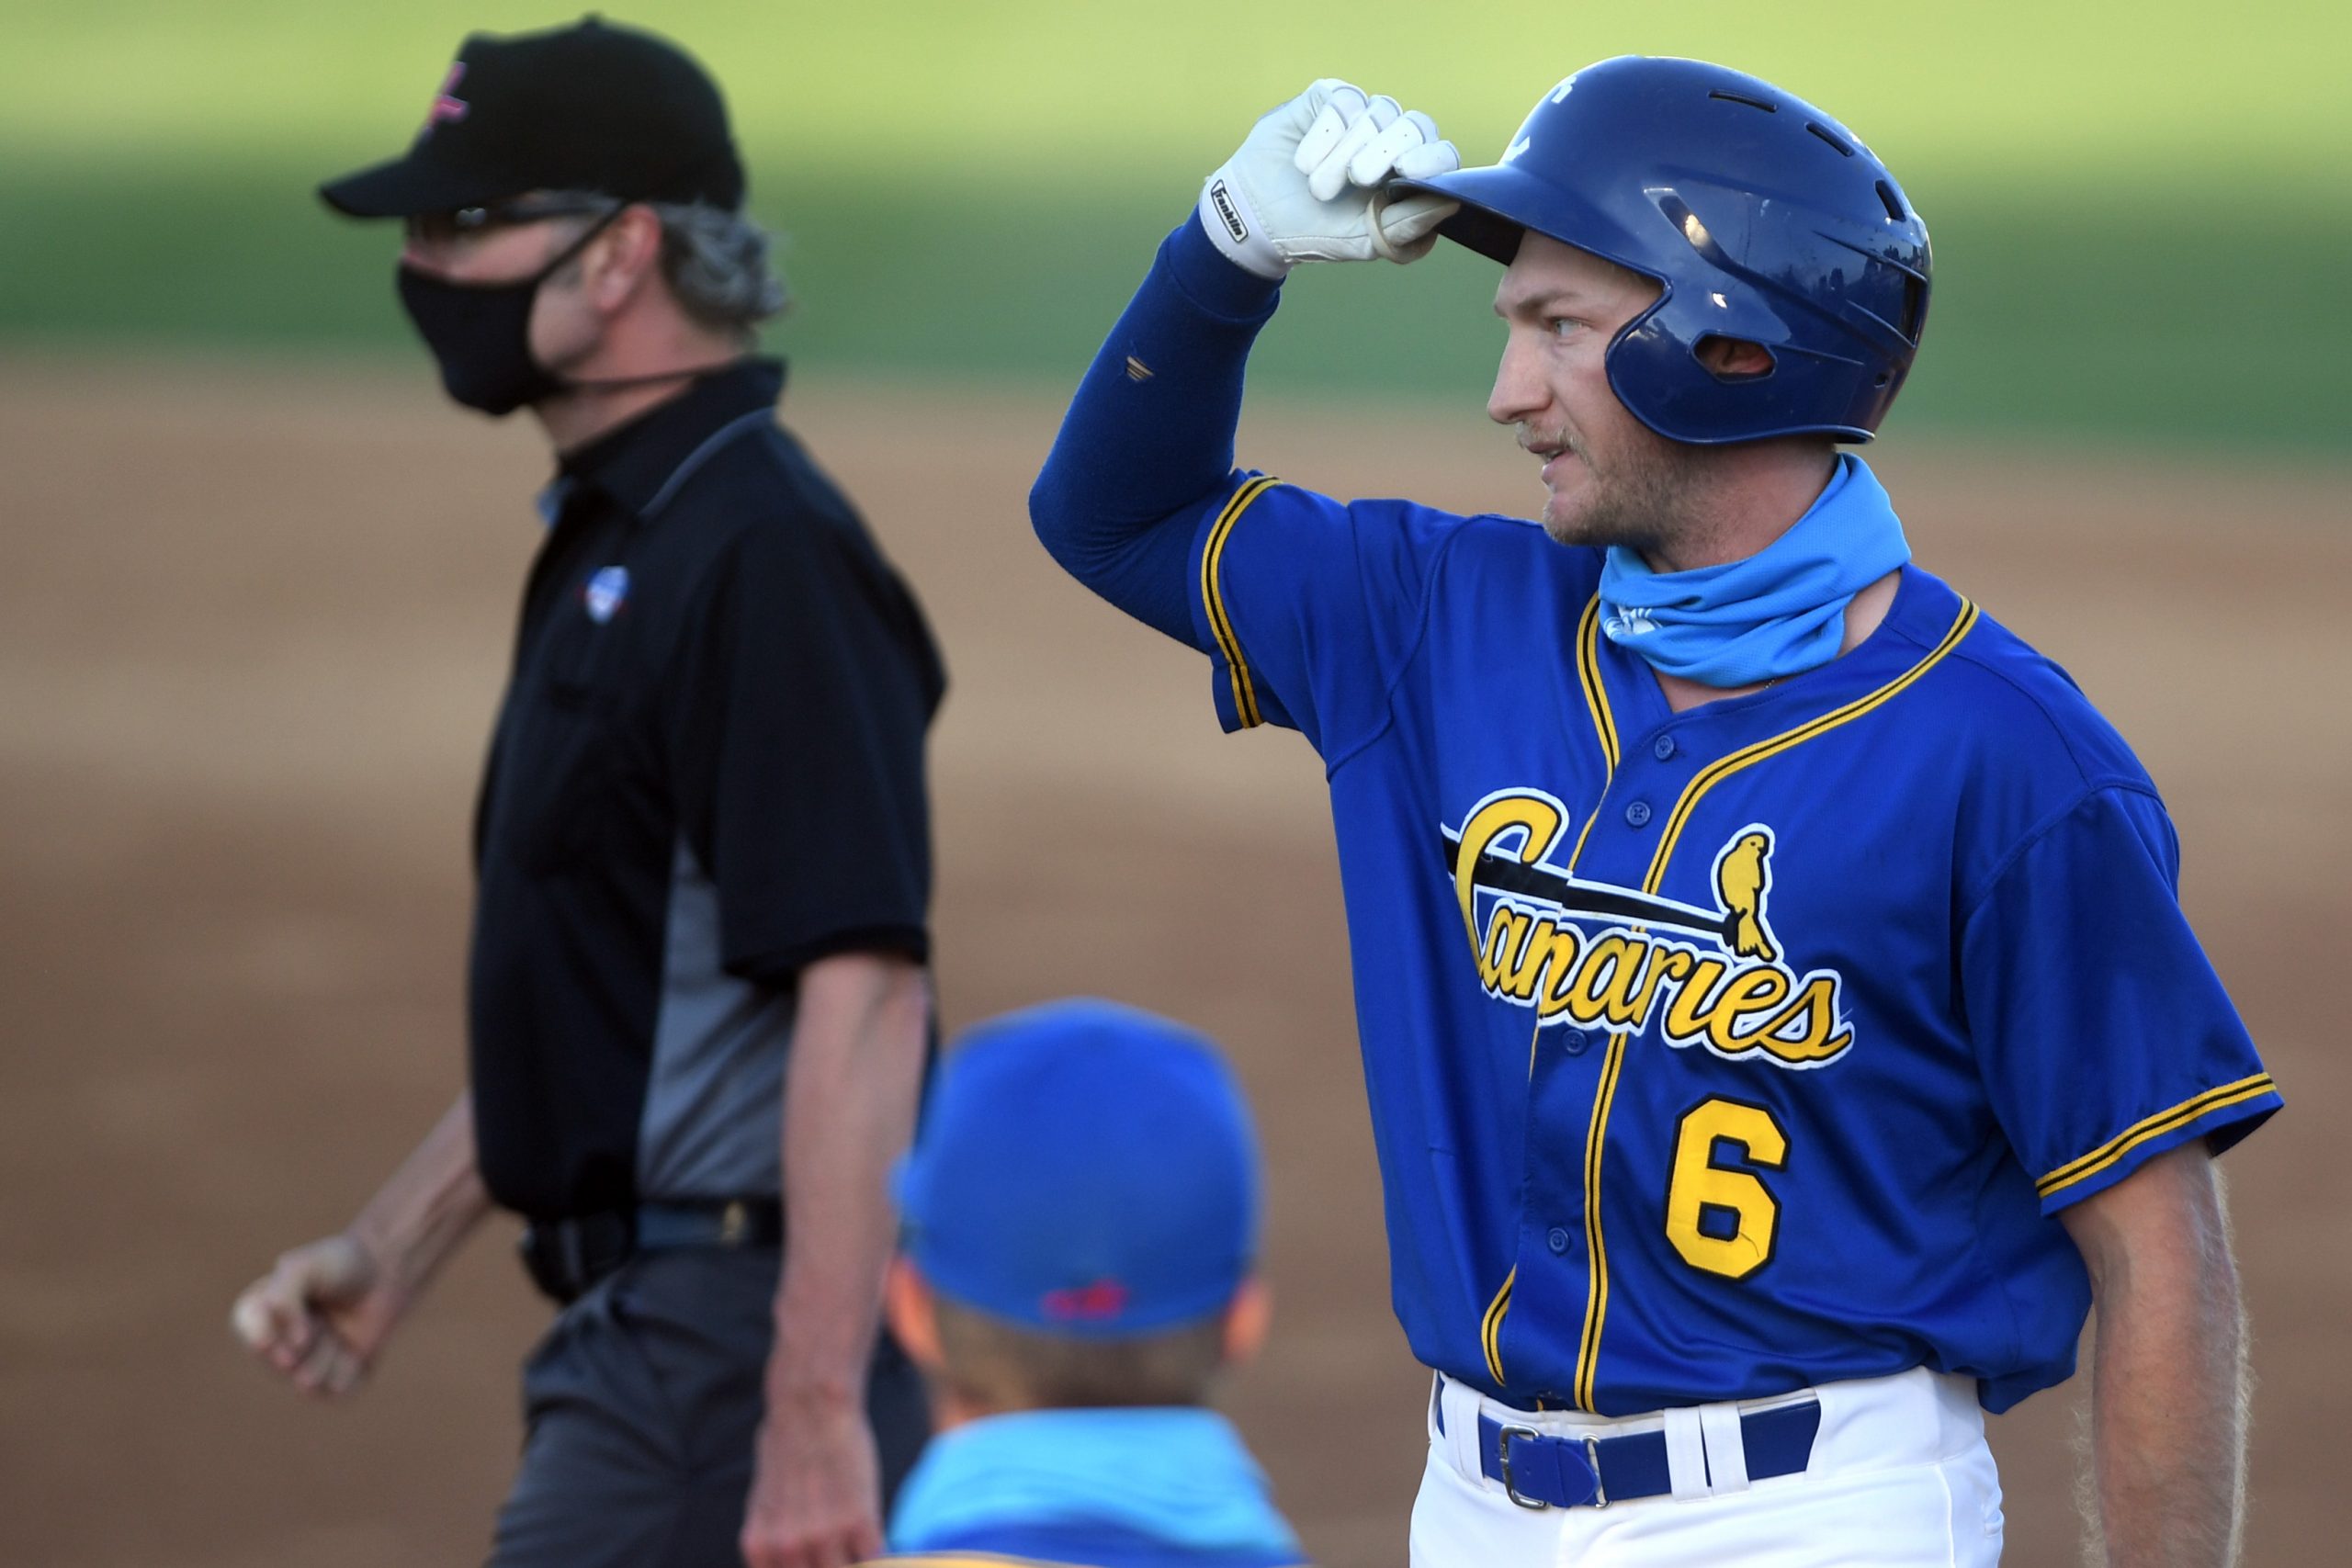 Landon Sparks Canaries Victory over Dogs